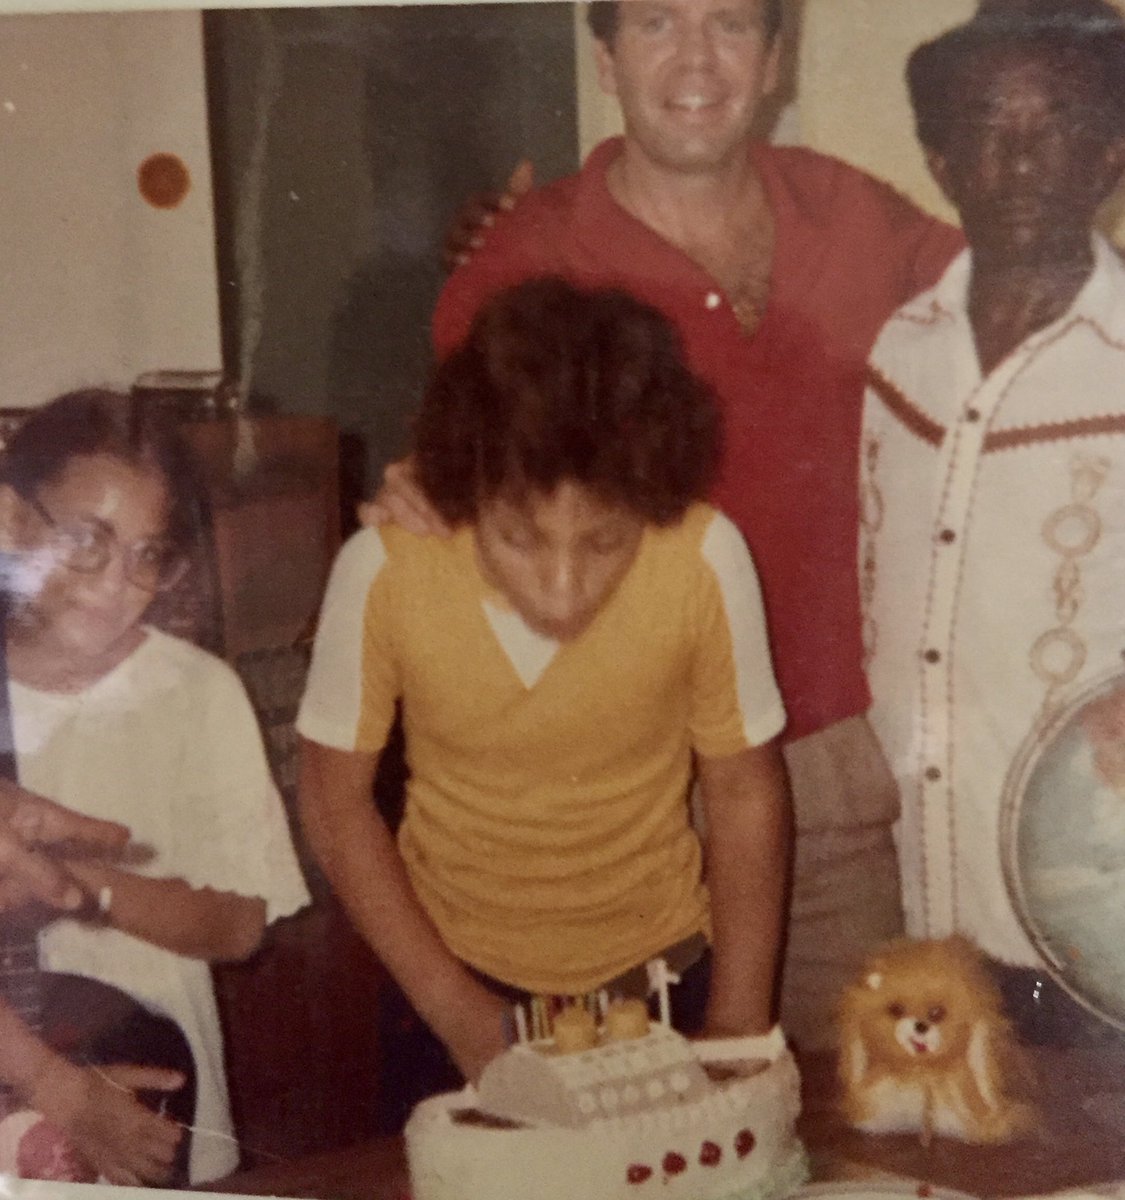 🌊.. ‘78 #79 Nemesu Ave Singapore 🇸🇬.. off Upper Thompson Rd. Eddie jr. on his 11th birthday 🎊 party 🍕🍰🍧..⚓️ ‘with Salamet my driver & friend with his family (1st pic) Sgt. Lewis who just got back from Vietnam 🇻🇳 and my daughter Sheliah’.. 🙏🏻  #NOLA #FrenchQuarters